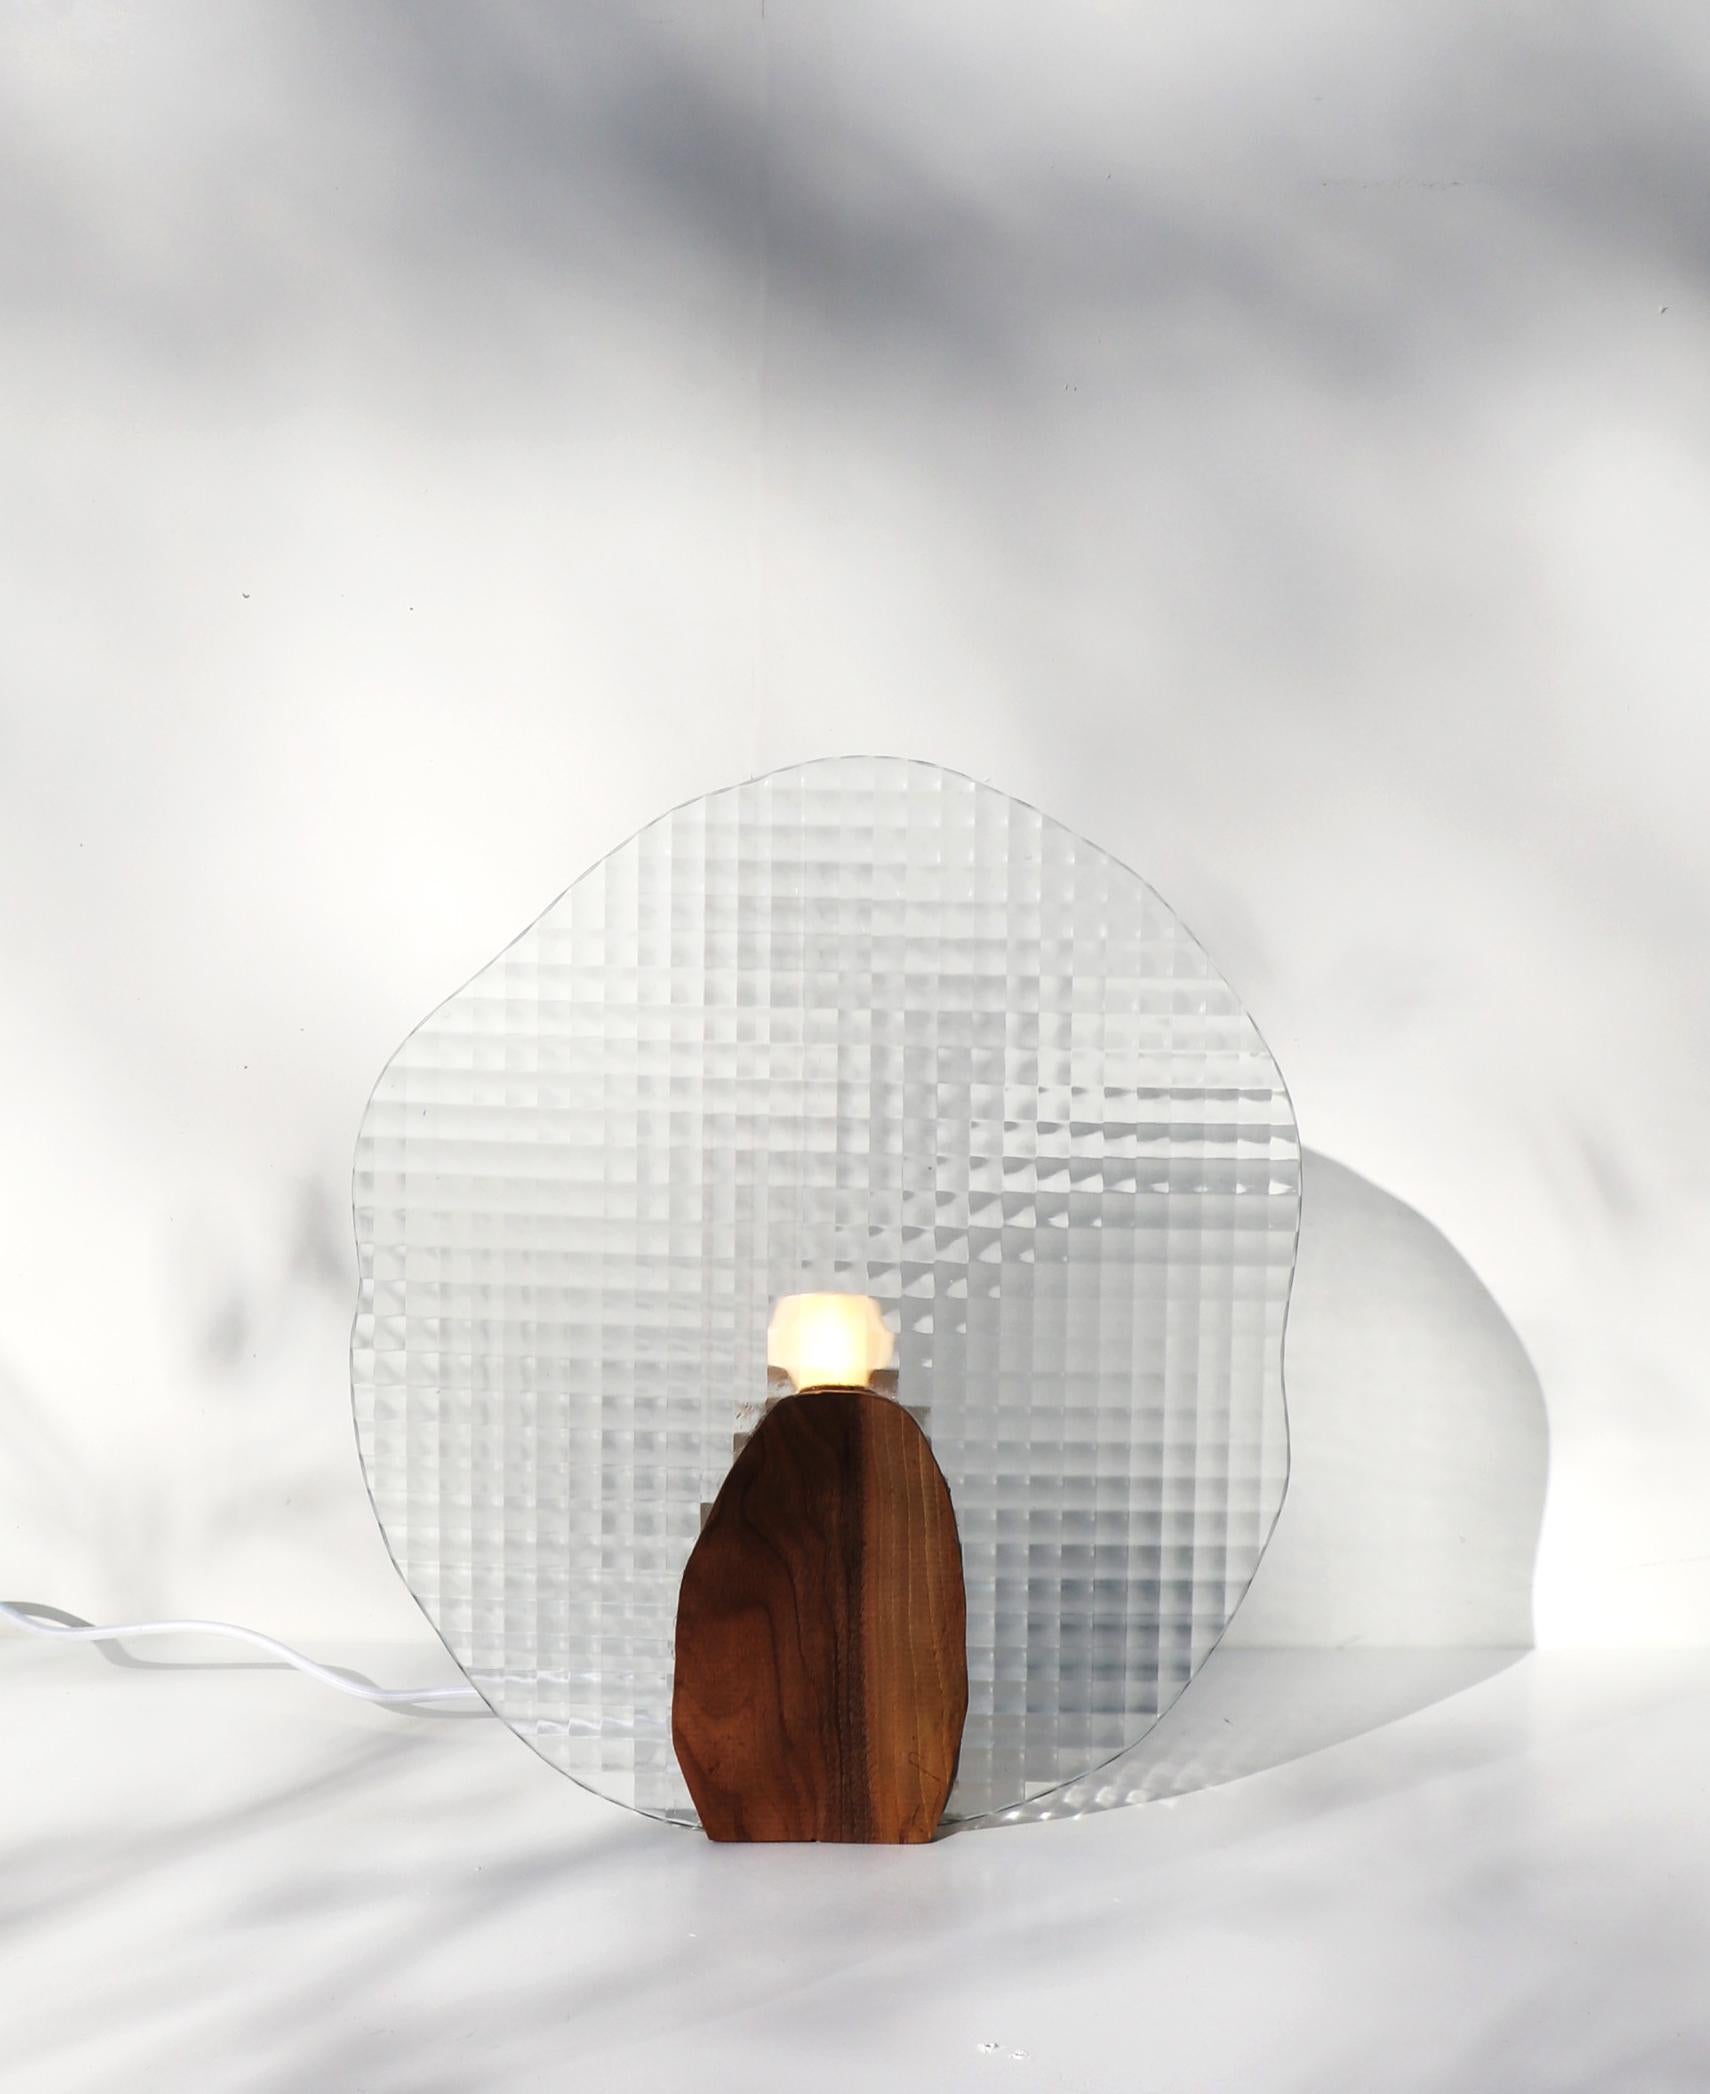 Iris lamp by Alice Lahana Studio
Dimensions: W 37 x D 5 x H 43 cm
Materials: walnut, glass, varnish

The Iris lamp can be seen from the front or from the back. It evolves throughout the day according to the rays of light that cross its